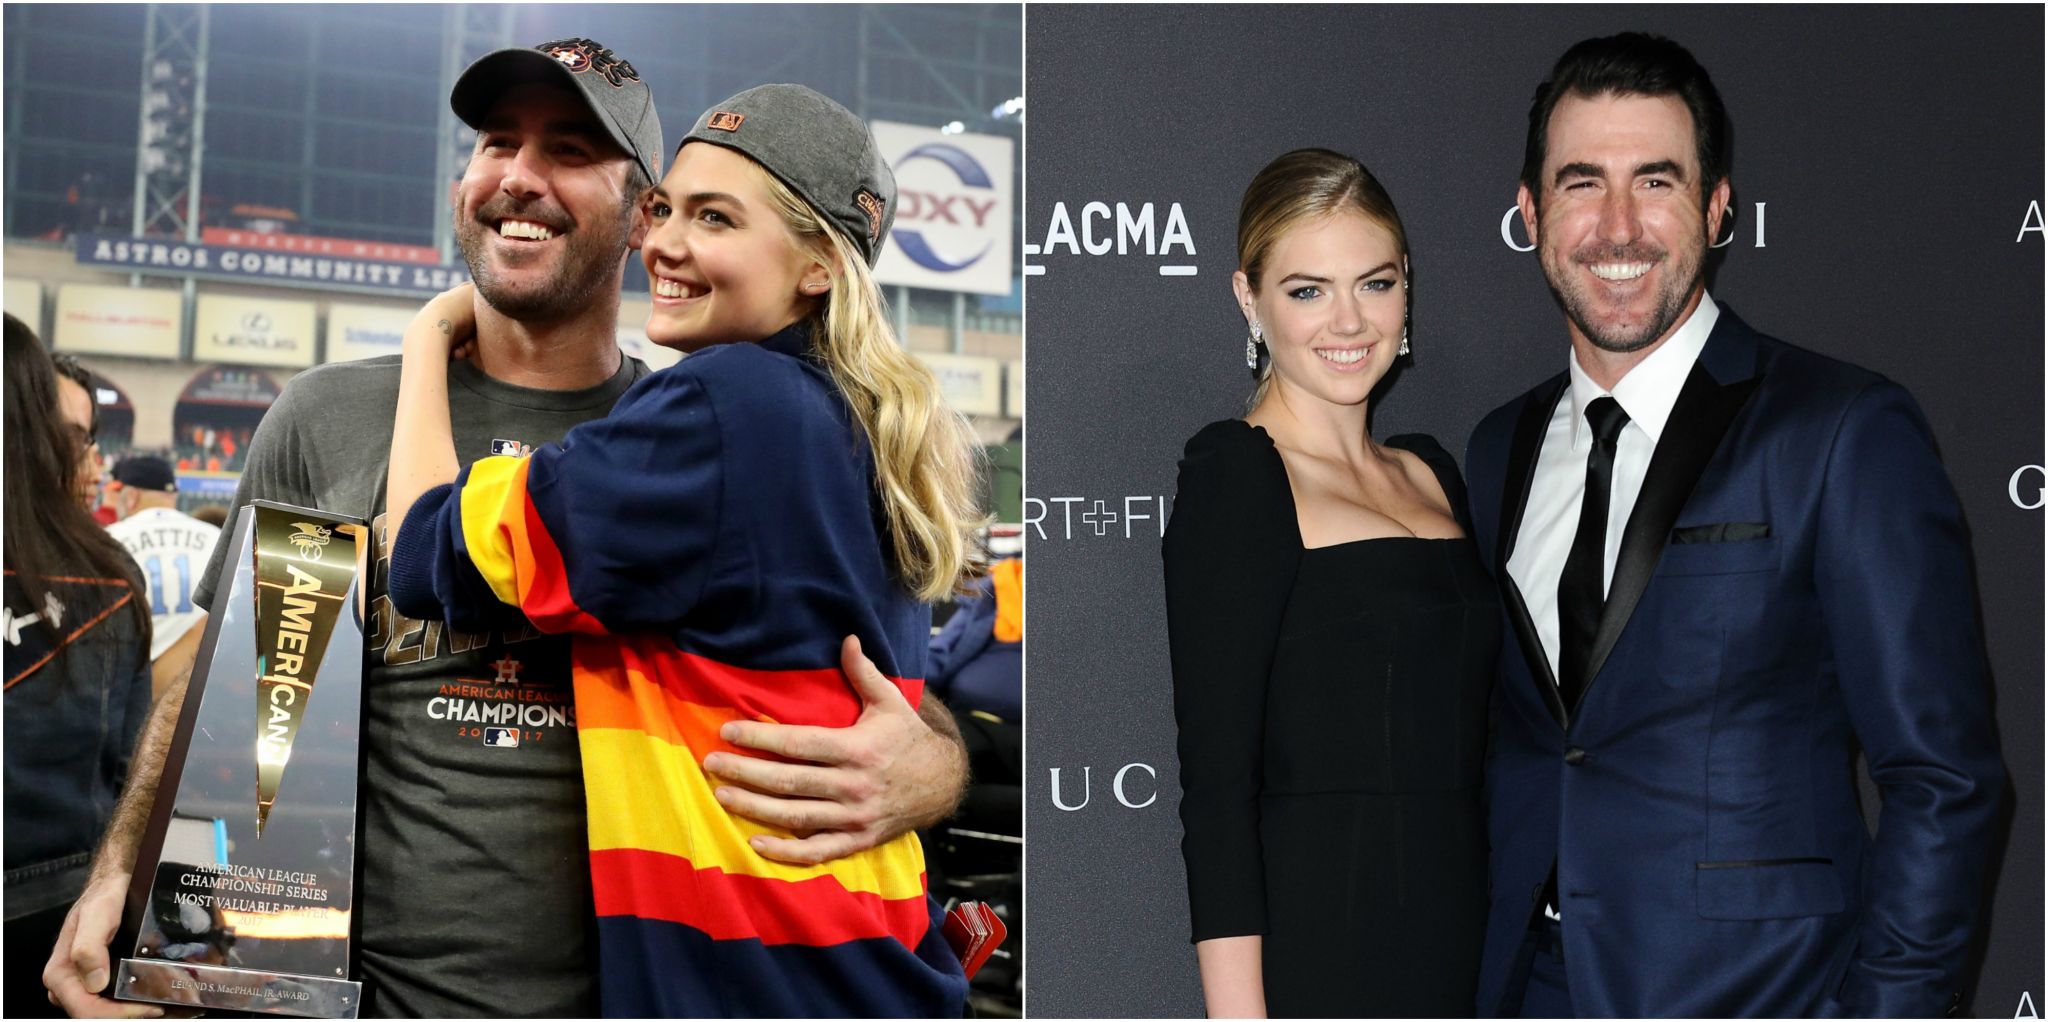 Fans compare Kate Upton and Justin Verlander's relationship to Tom